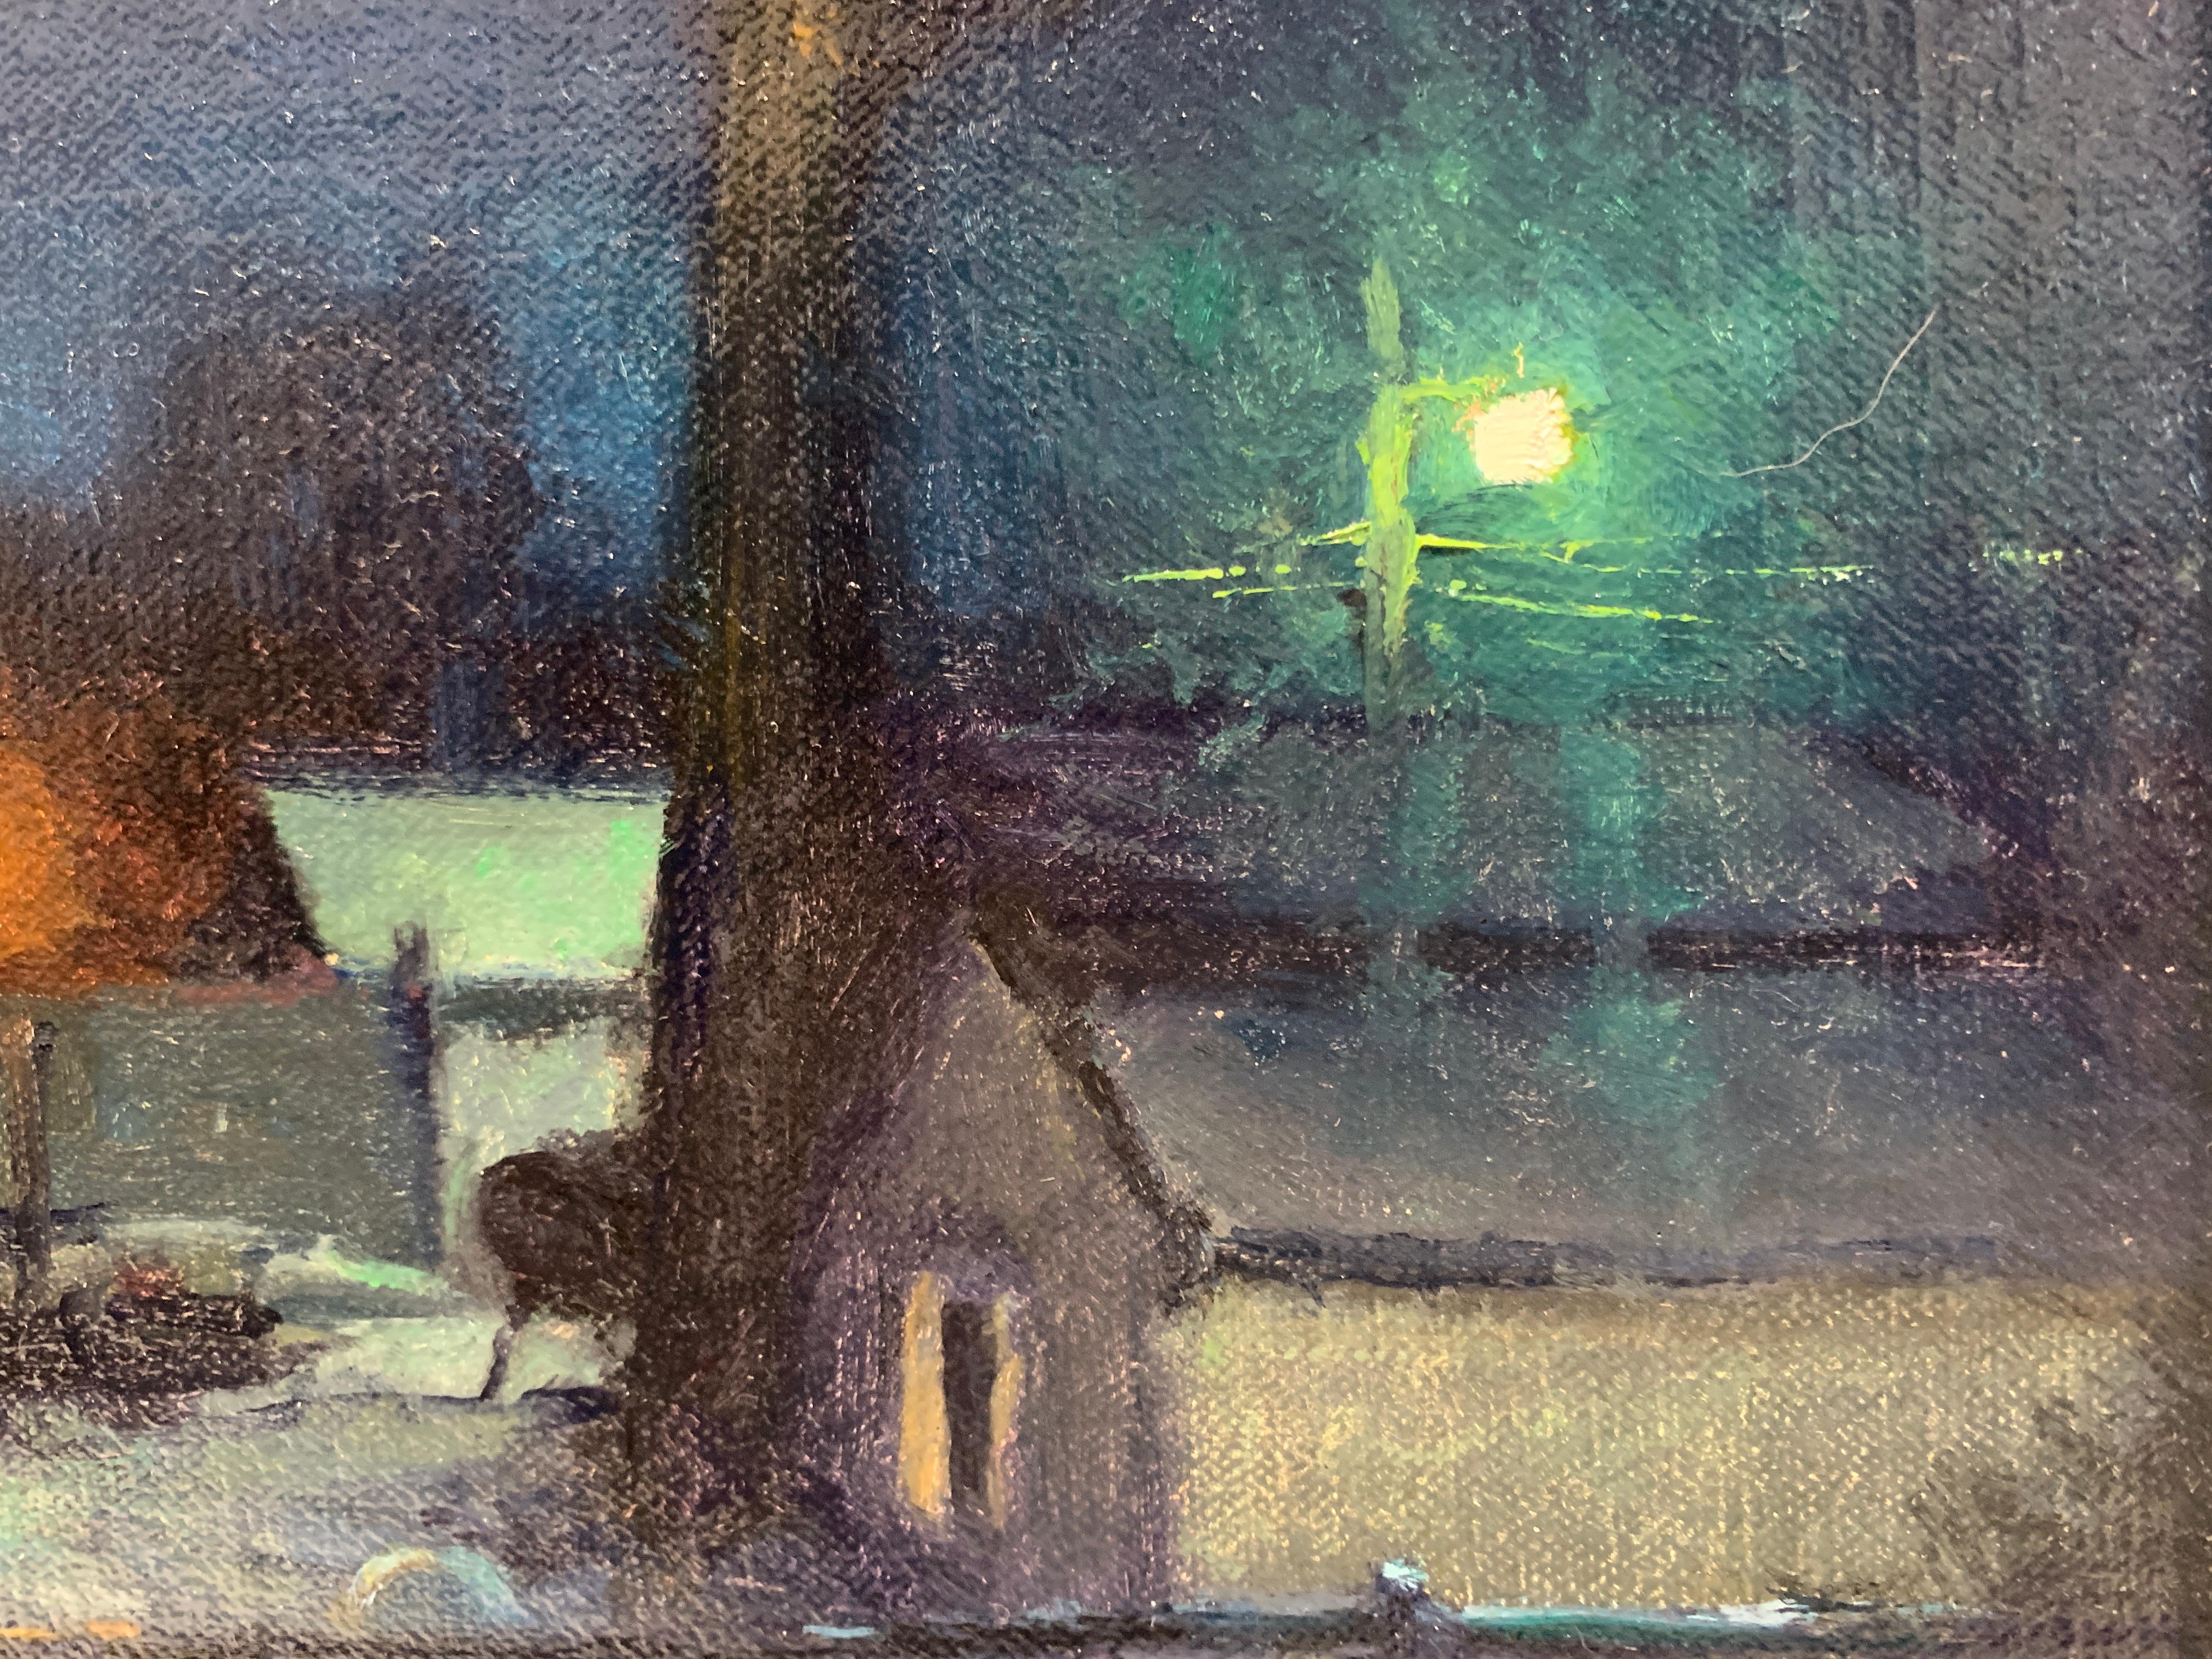 An oil painting of a back yard at nighttime. Interior lights glow from the windows, a distant lamppost shines white light, and a further one shines a warm orange light. A chain link fence rests along the foreground. 

Painting dimensions: 8 x 12